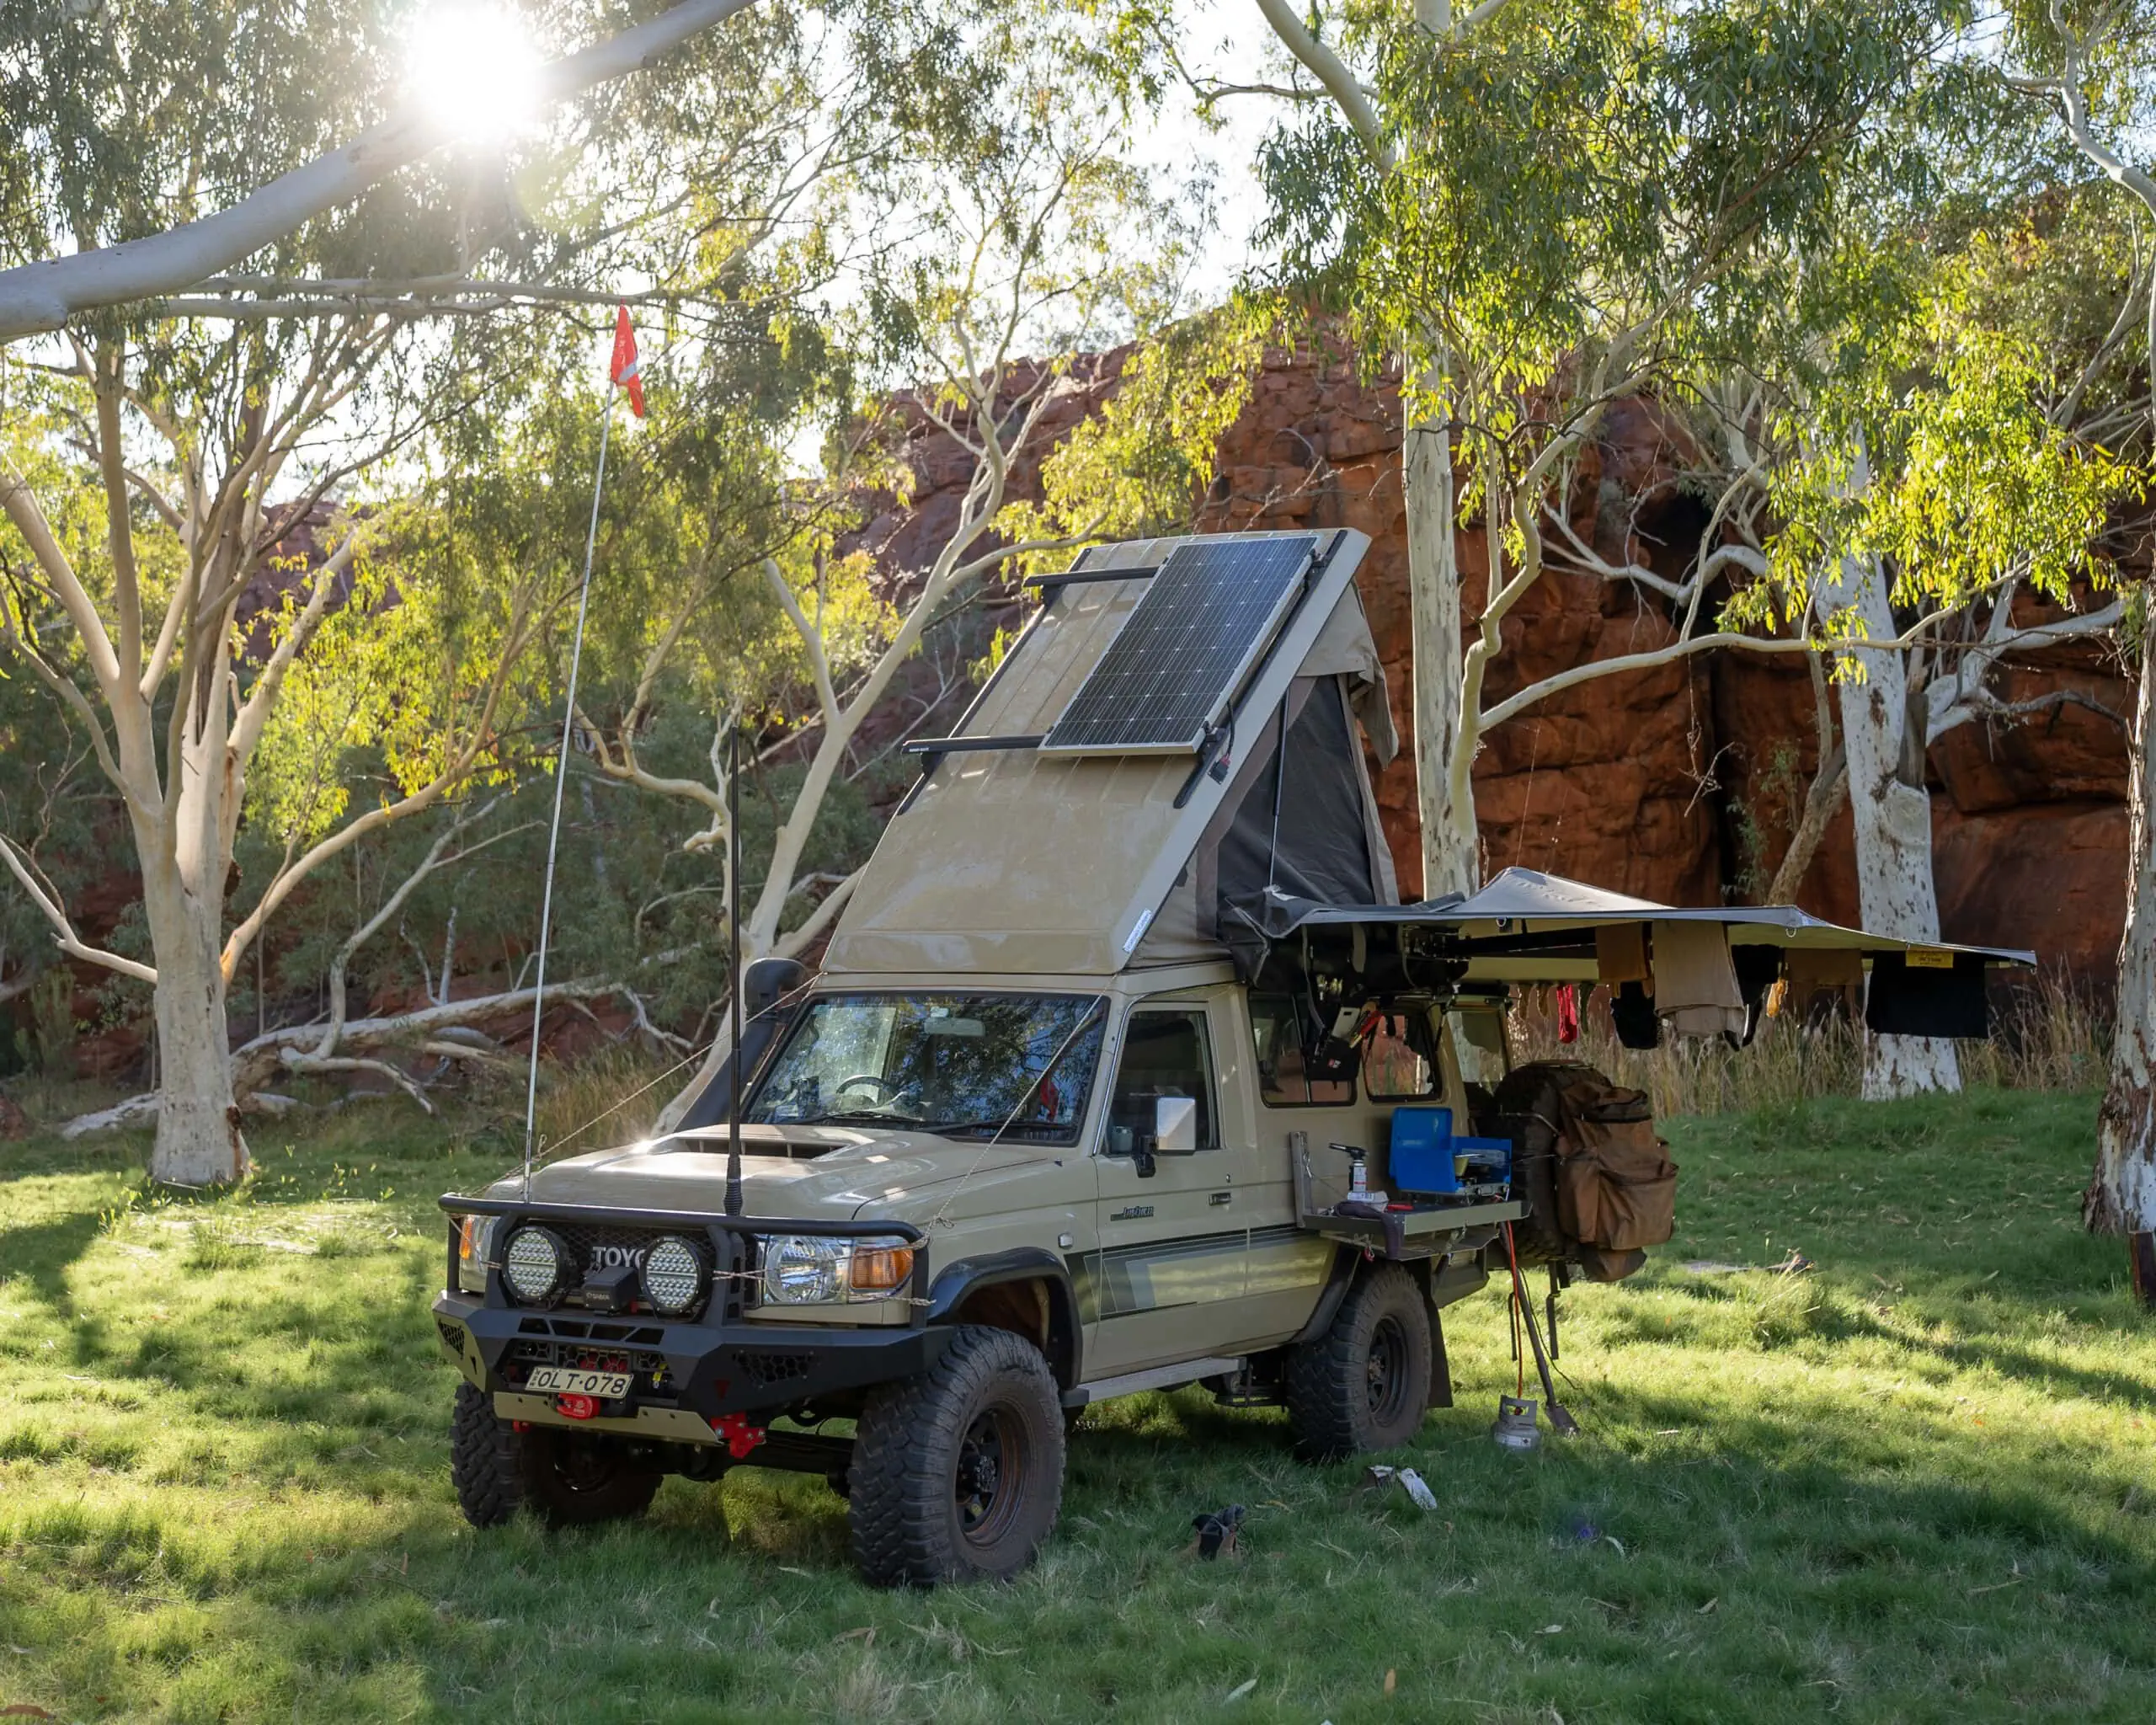 Toyota Troopy Destination4WD free standing 4WD awnings Landcruiser 78 series Troopy Overland travellers